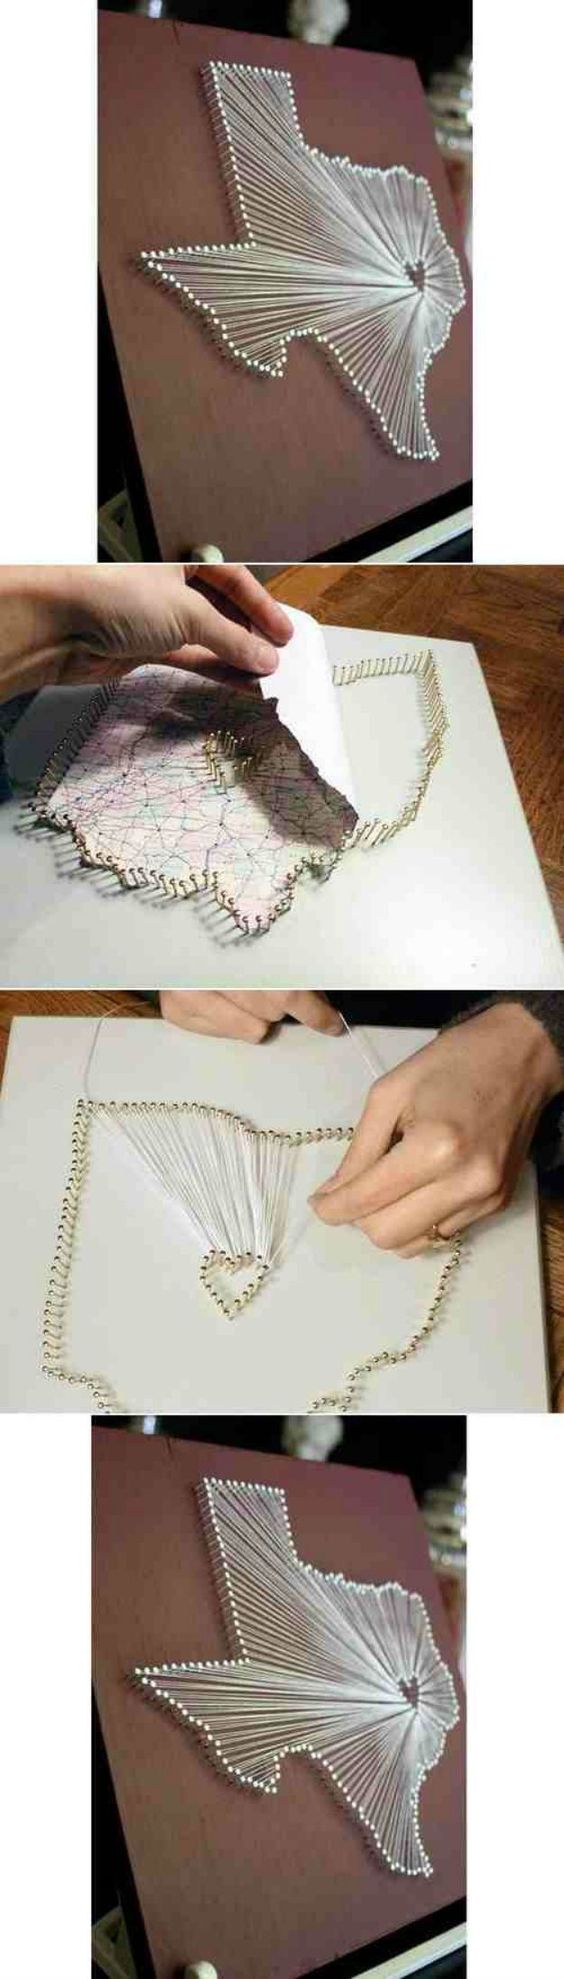 35 DIY String Art Ideas & Tutorials for Your Home Decoration